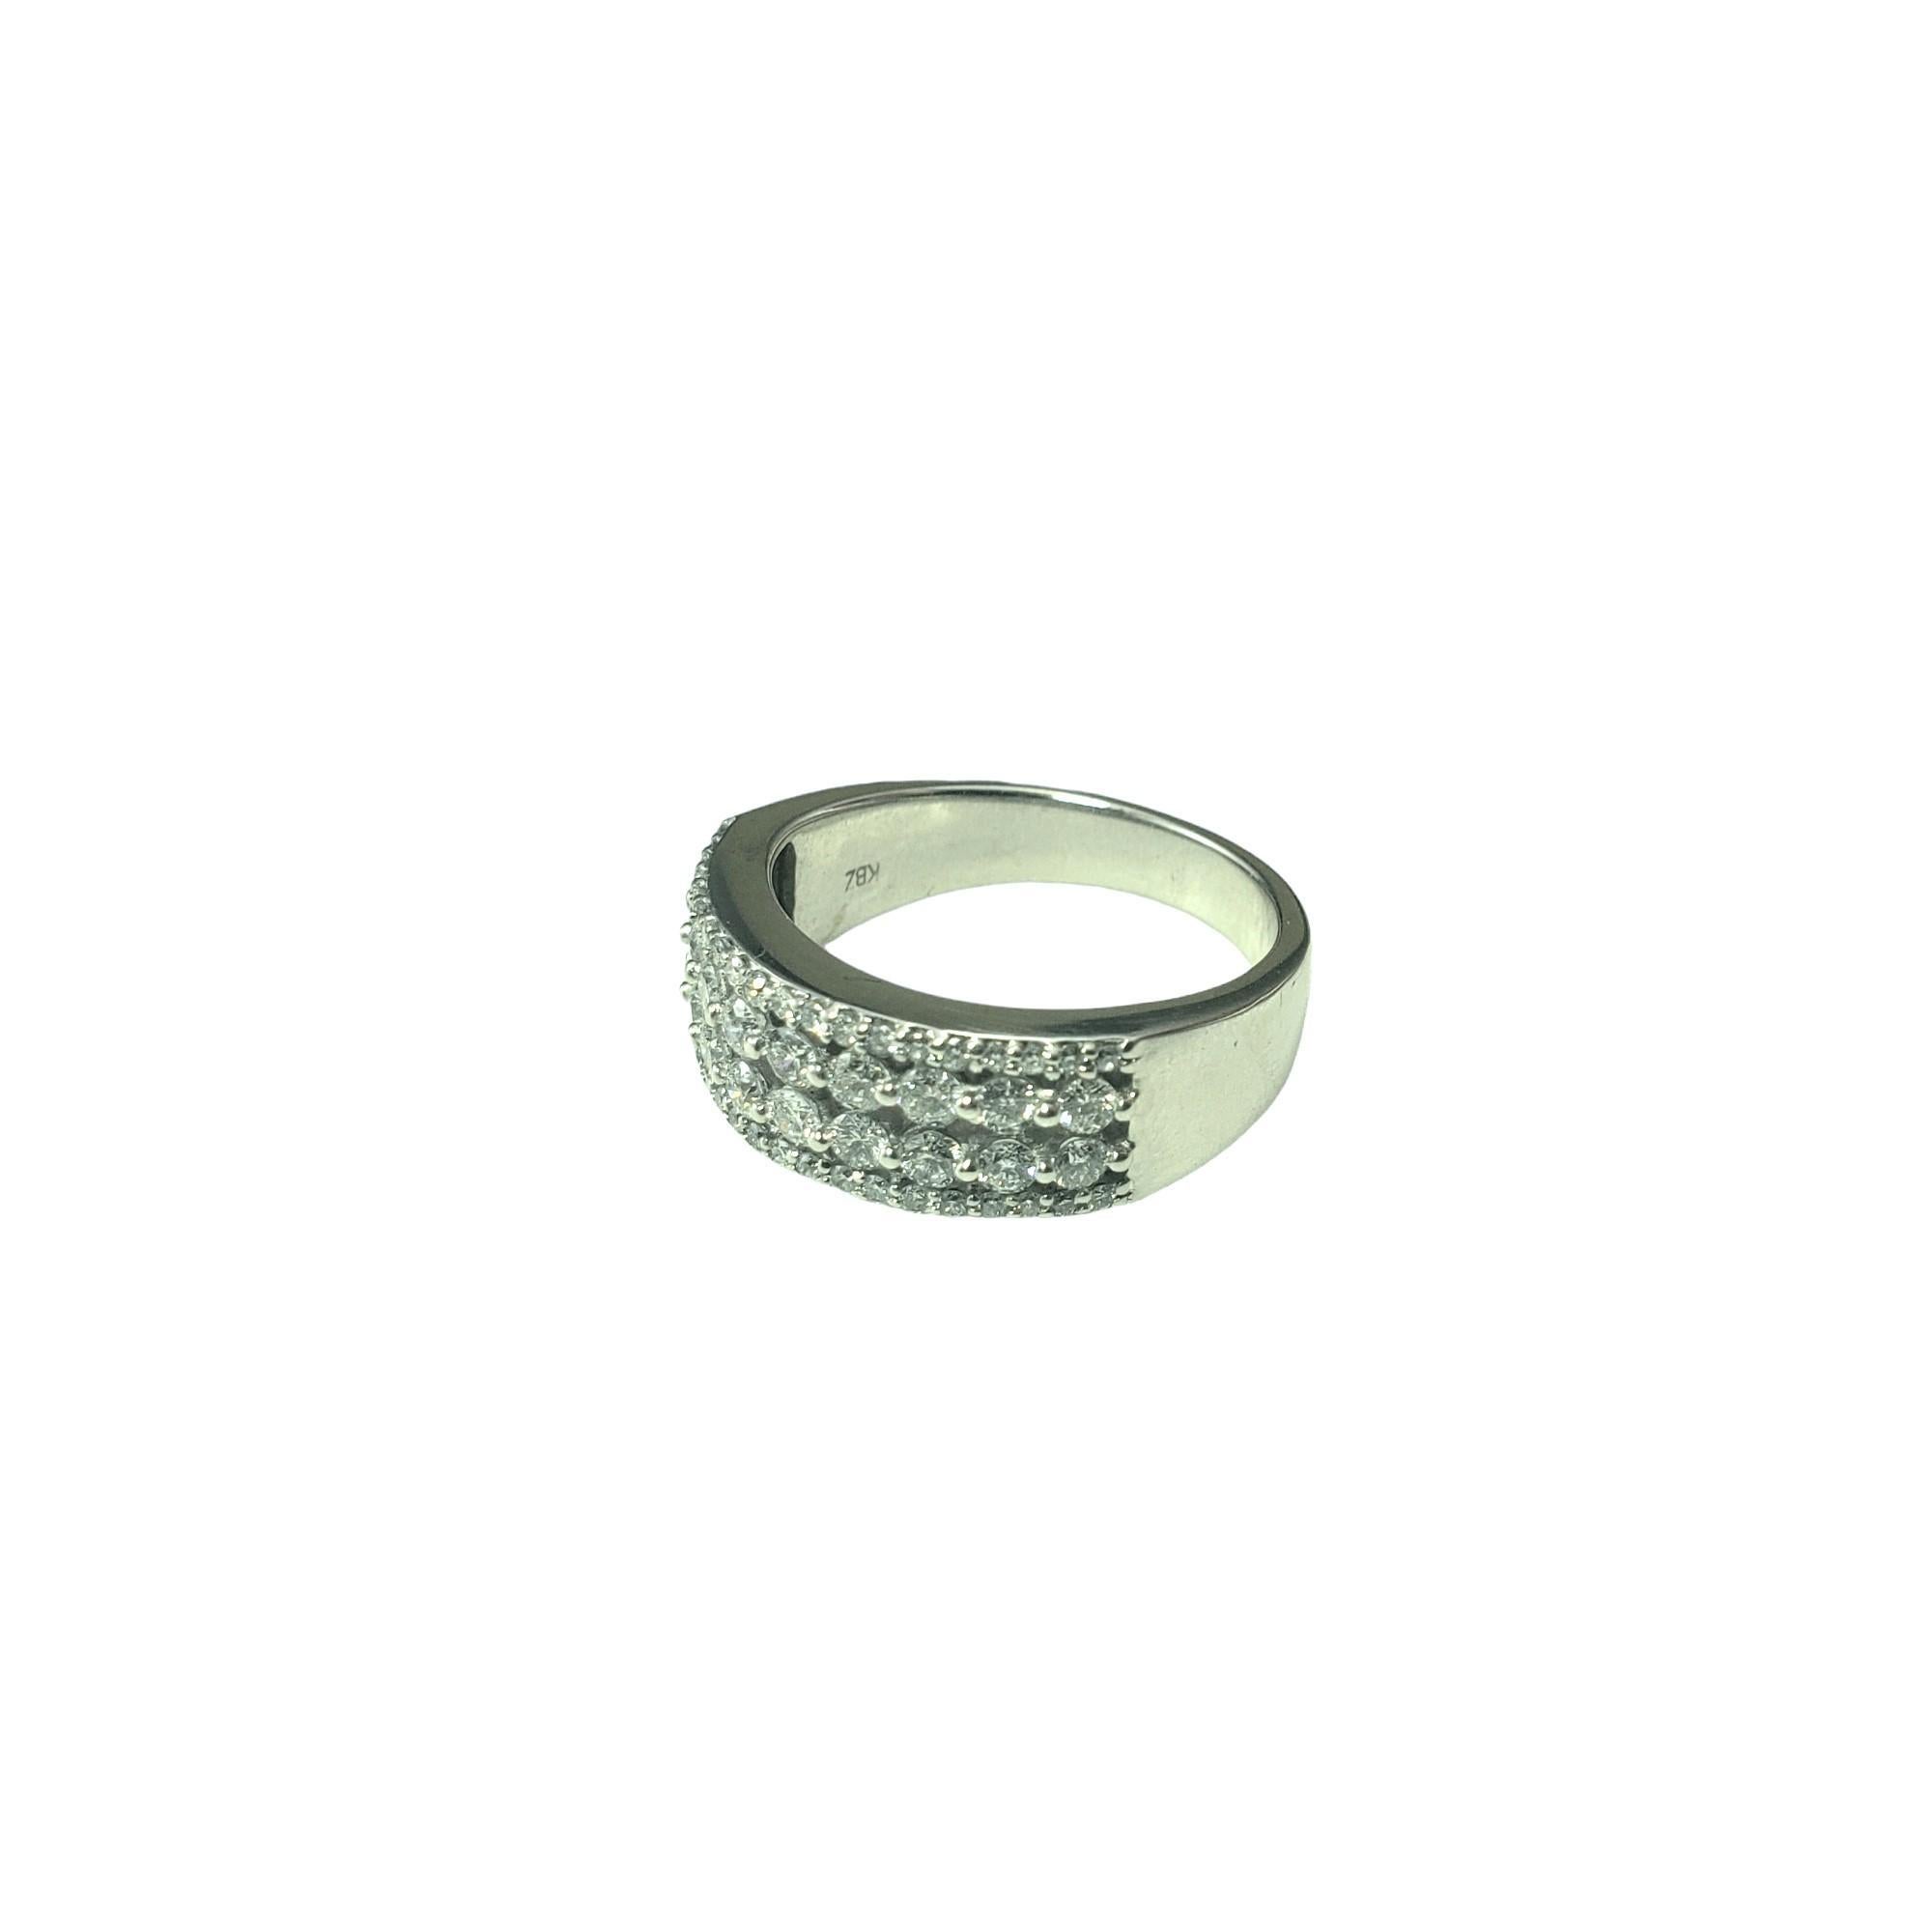 14 Karat White Gold Diamond Band Ring Size 7-7.25 #16828 In Good Condition For Sale In Washington Depot, CT